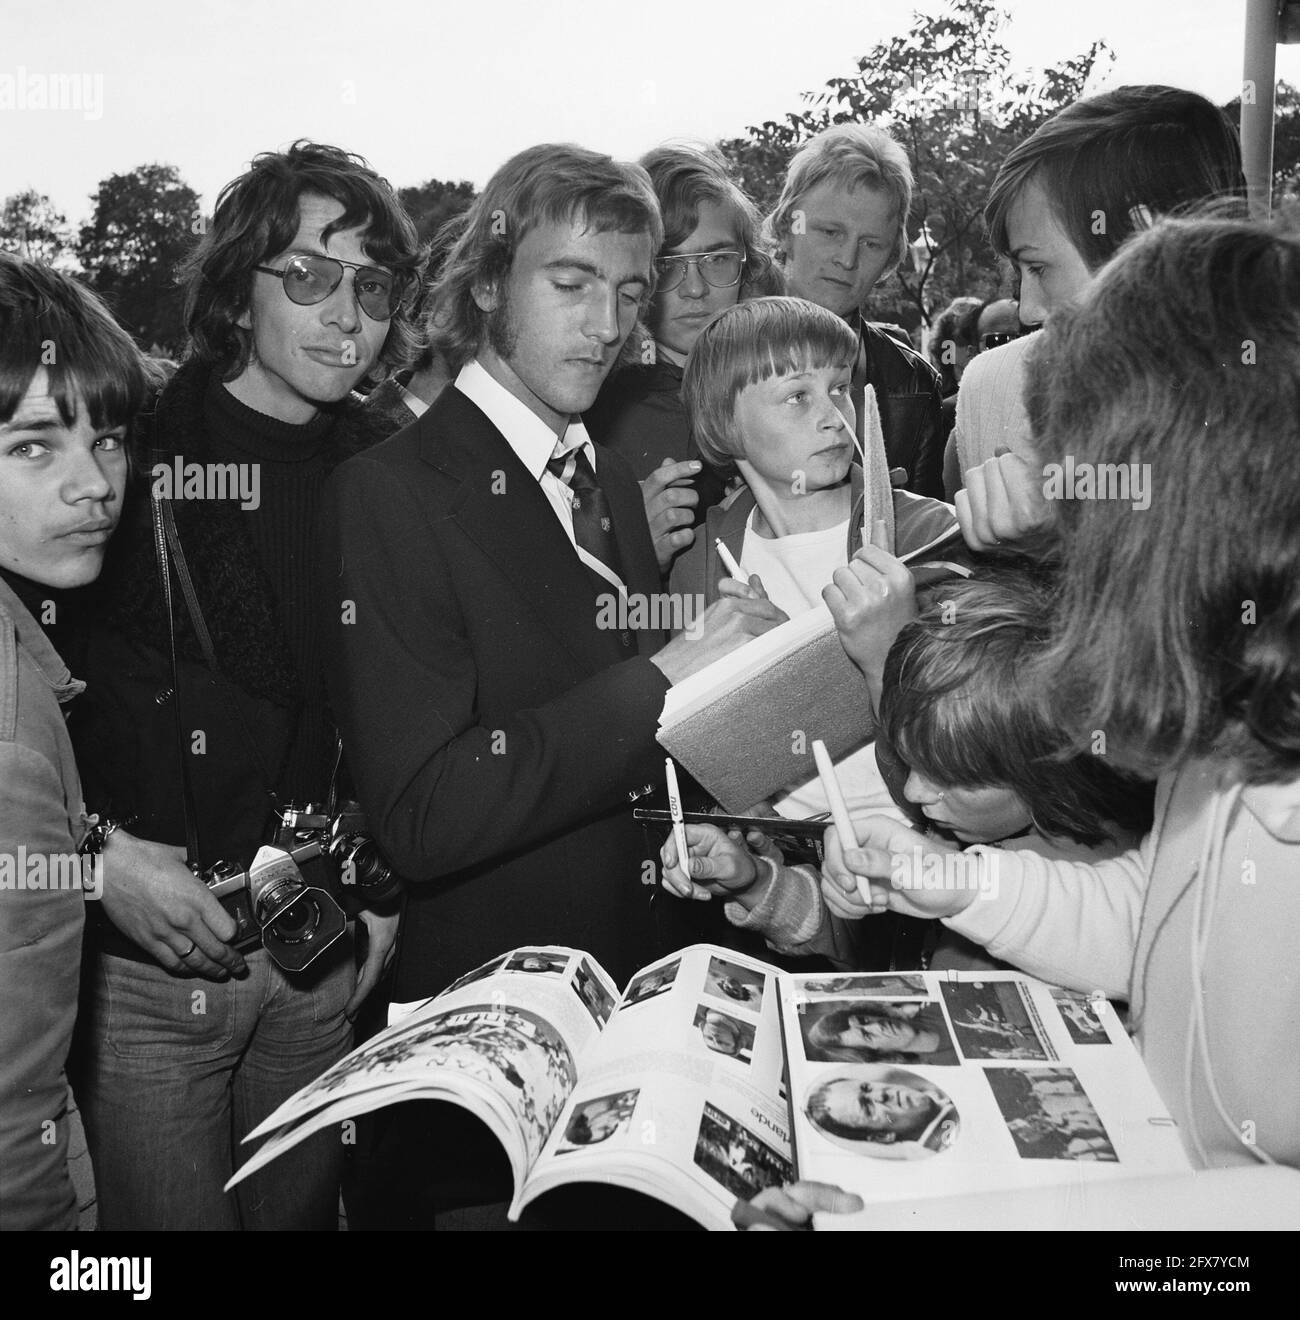 Arrival Dutch national team in Hiltrup ( West Germany ) World Cup 1974; Neeskens gives autographs, June 12, 1974, HANDSIGNERS, teams, sports, soccer, The Netherlands, 20th century press agency photo, news to remember, documentary, historic photography 1945-1990, visual stories, human history of the Twentieth Century, capturing moments in time Stock Photo